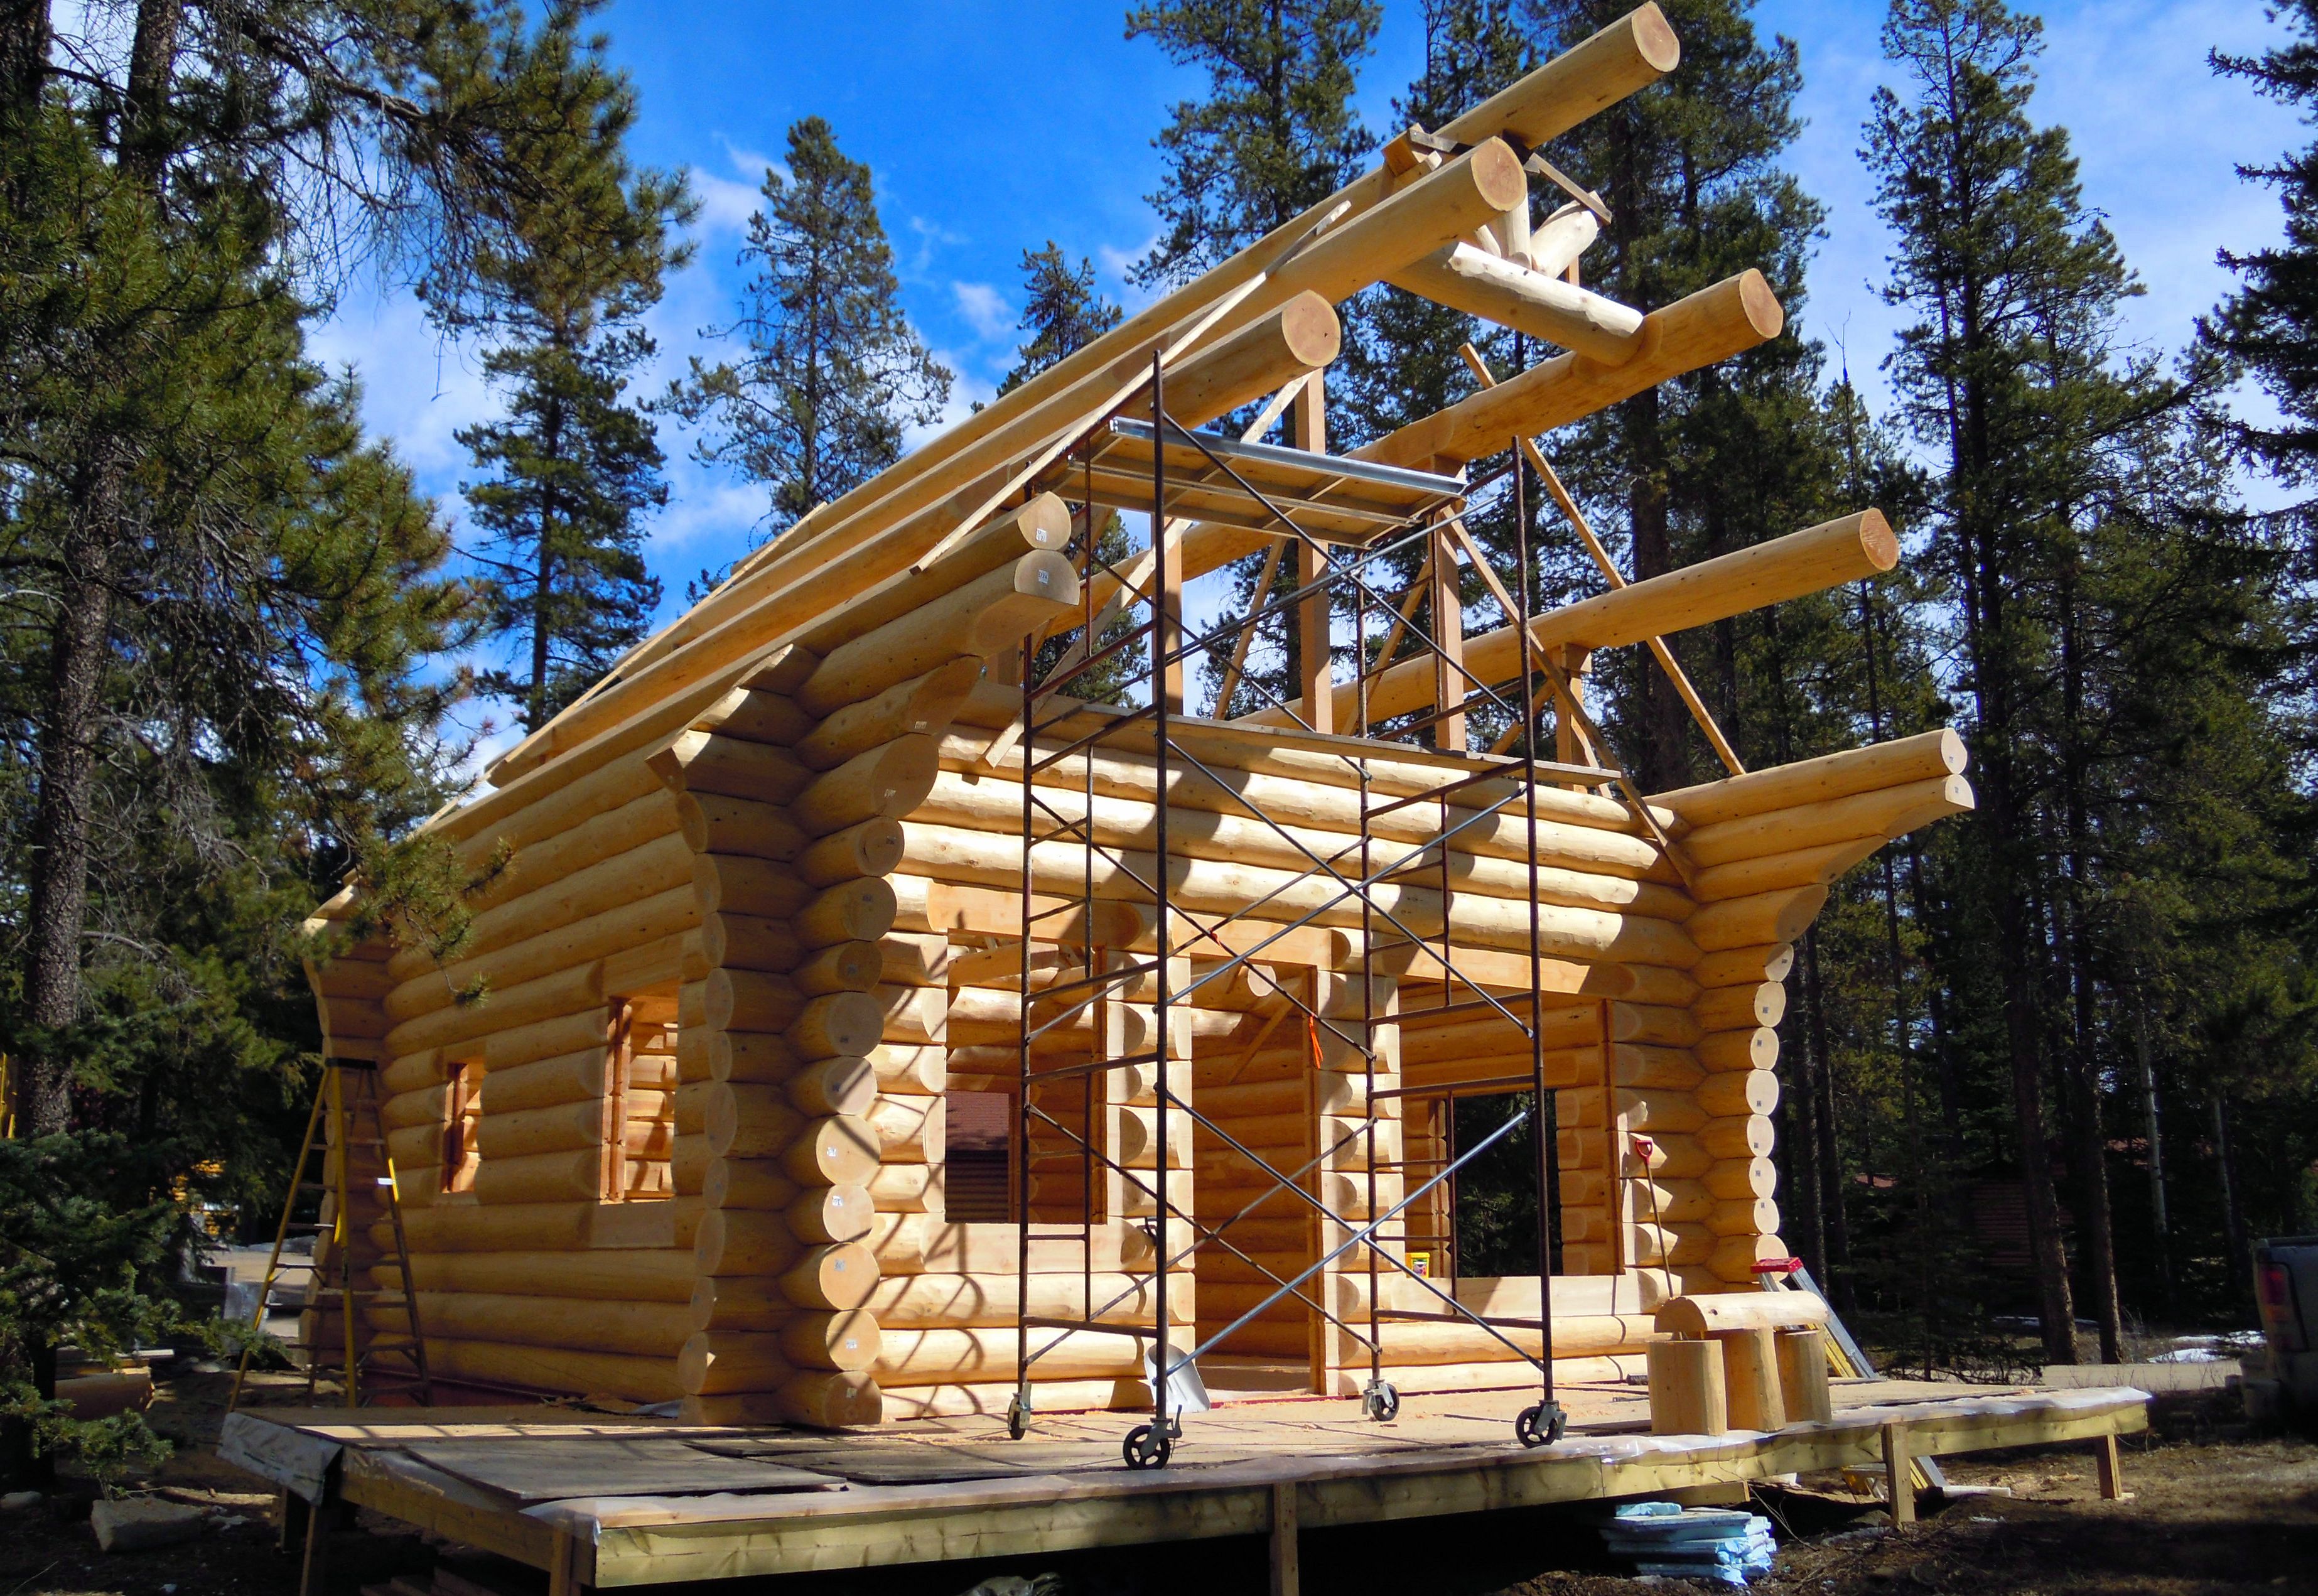 Building a Log Cabin - North American Log Crafters